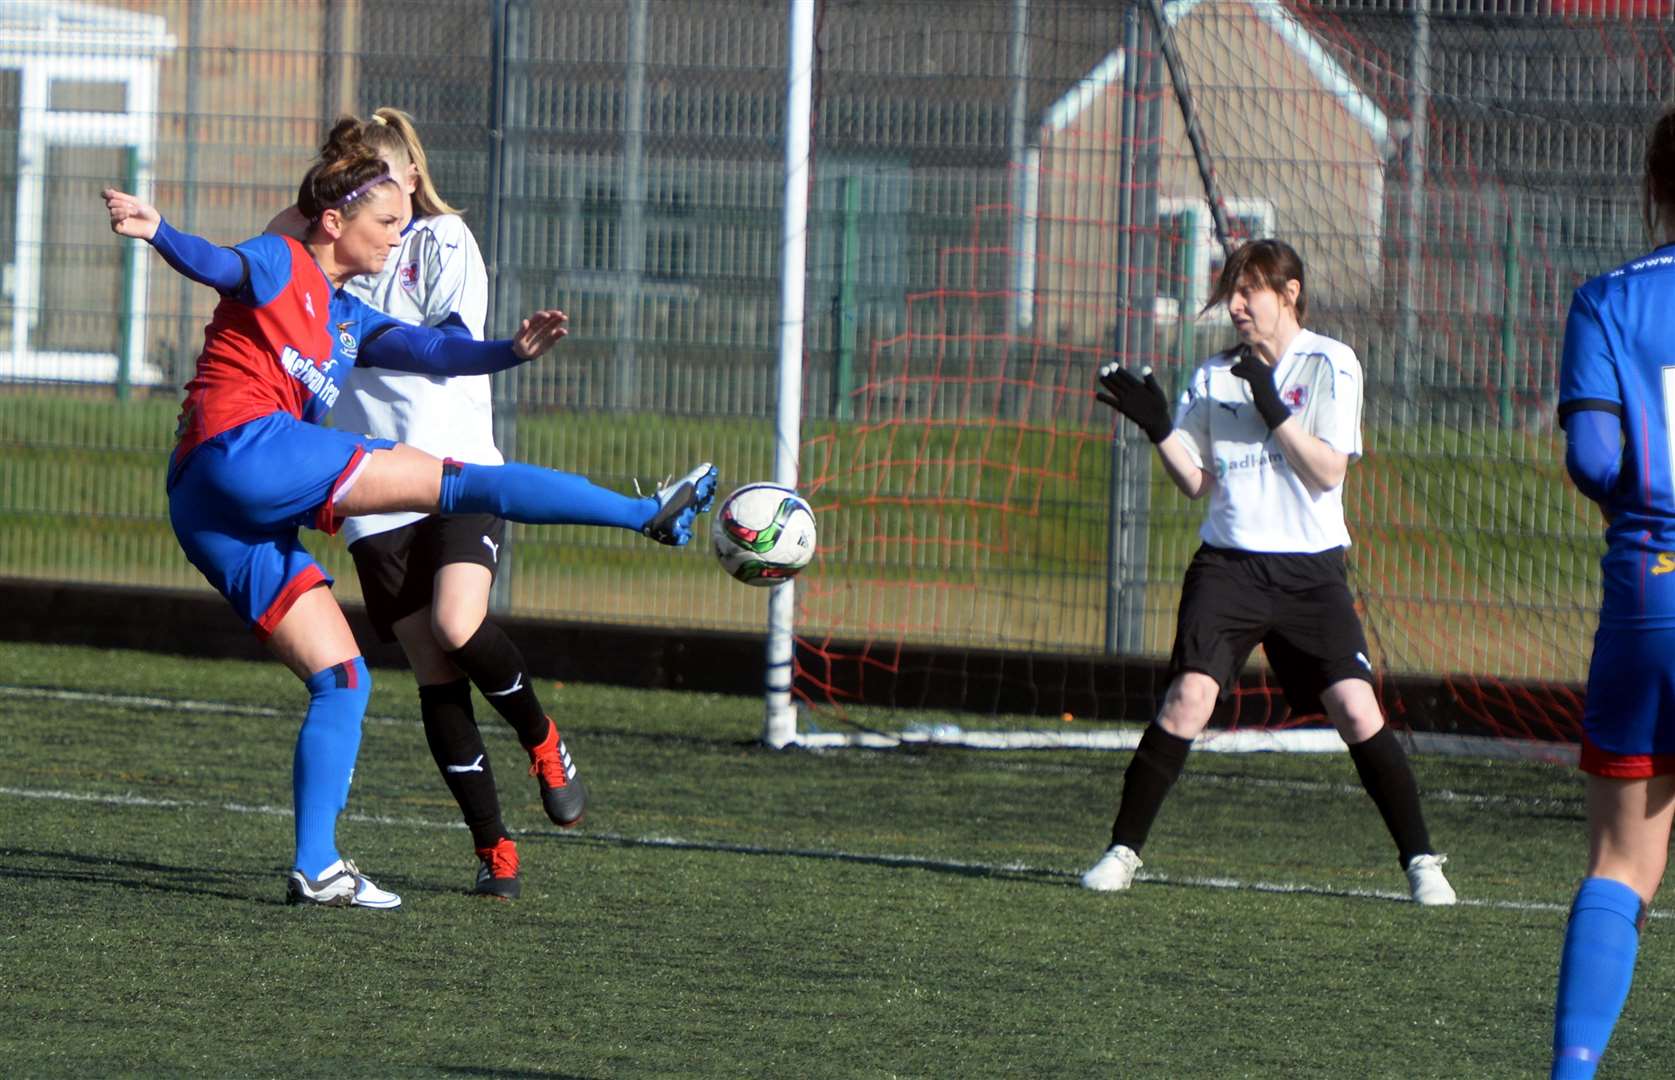 Natalie Bodiam scored one of two hat tricks for Inverness Caledonian Thistle against Raith Rovers last weekend.